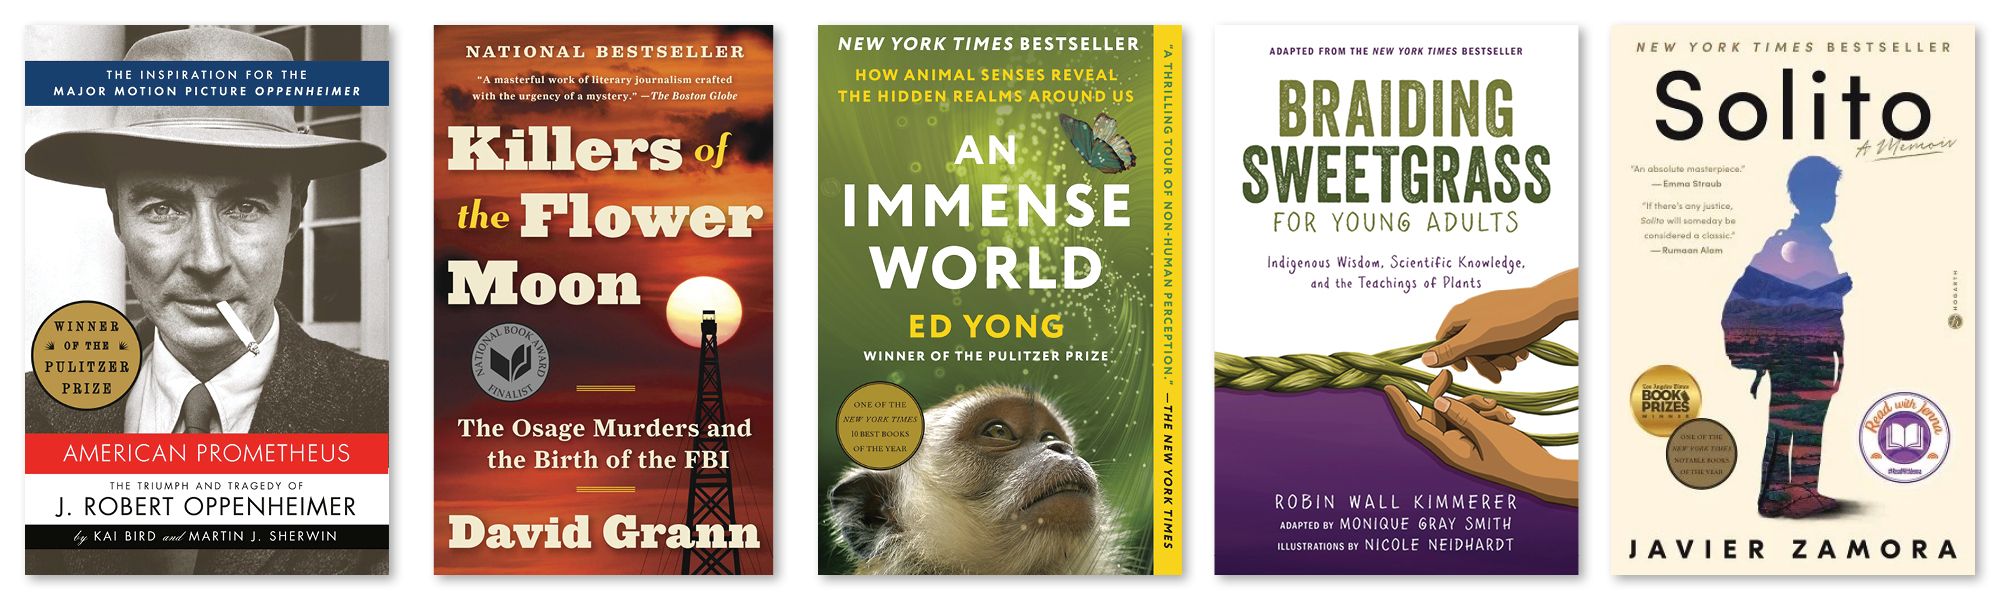 Paperback Nonfiction Books - Best Sellers - Books - The New York Times